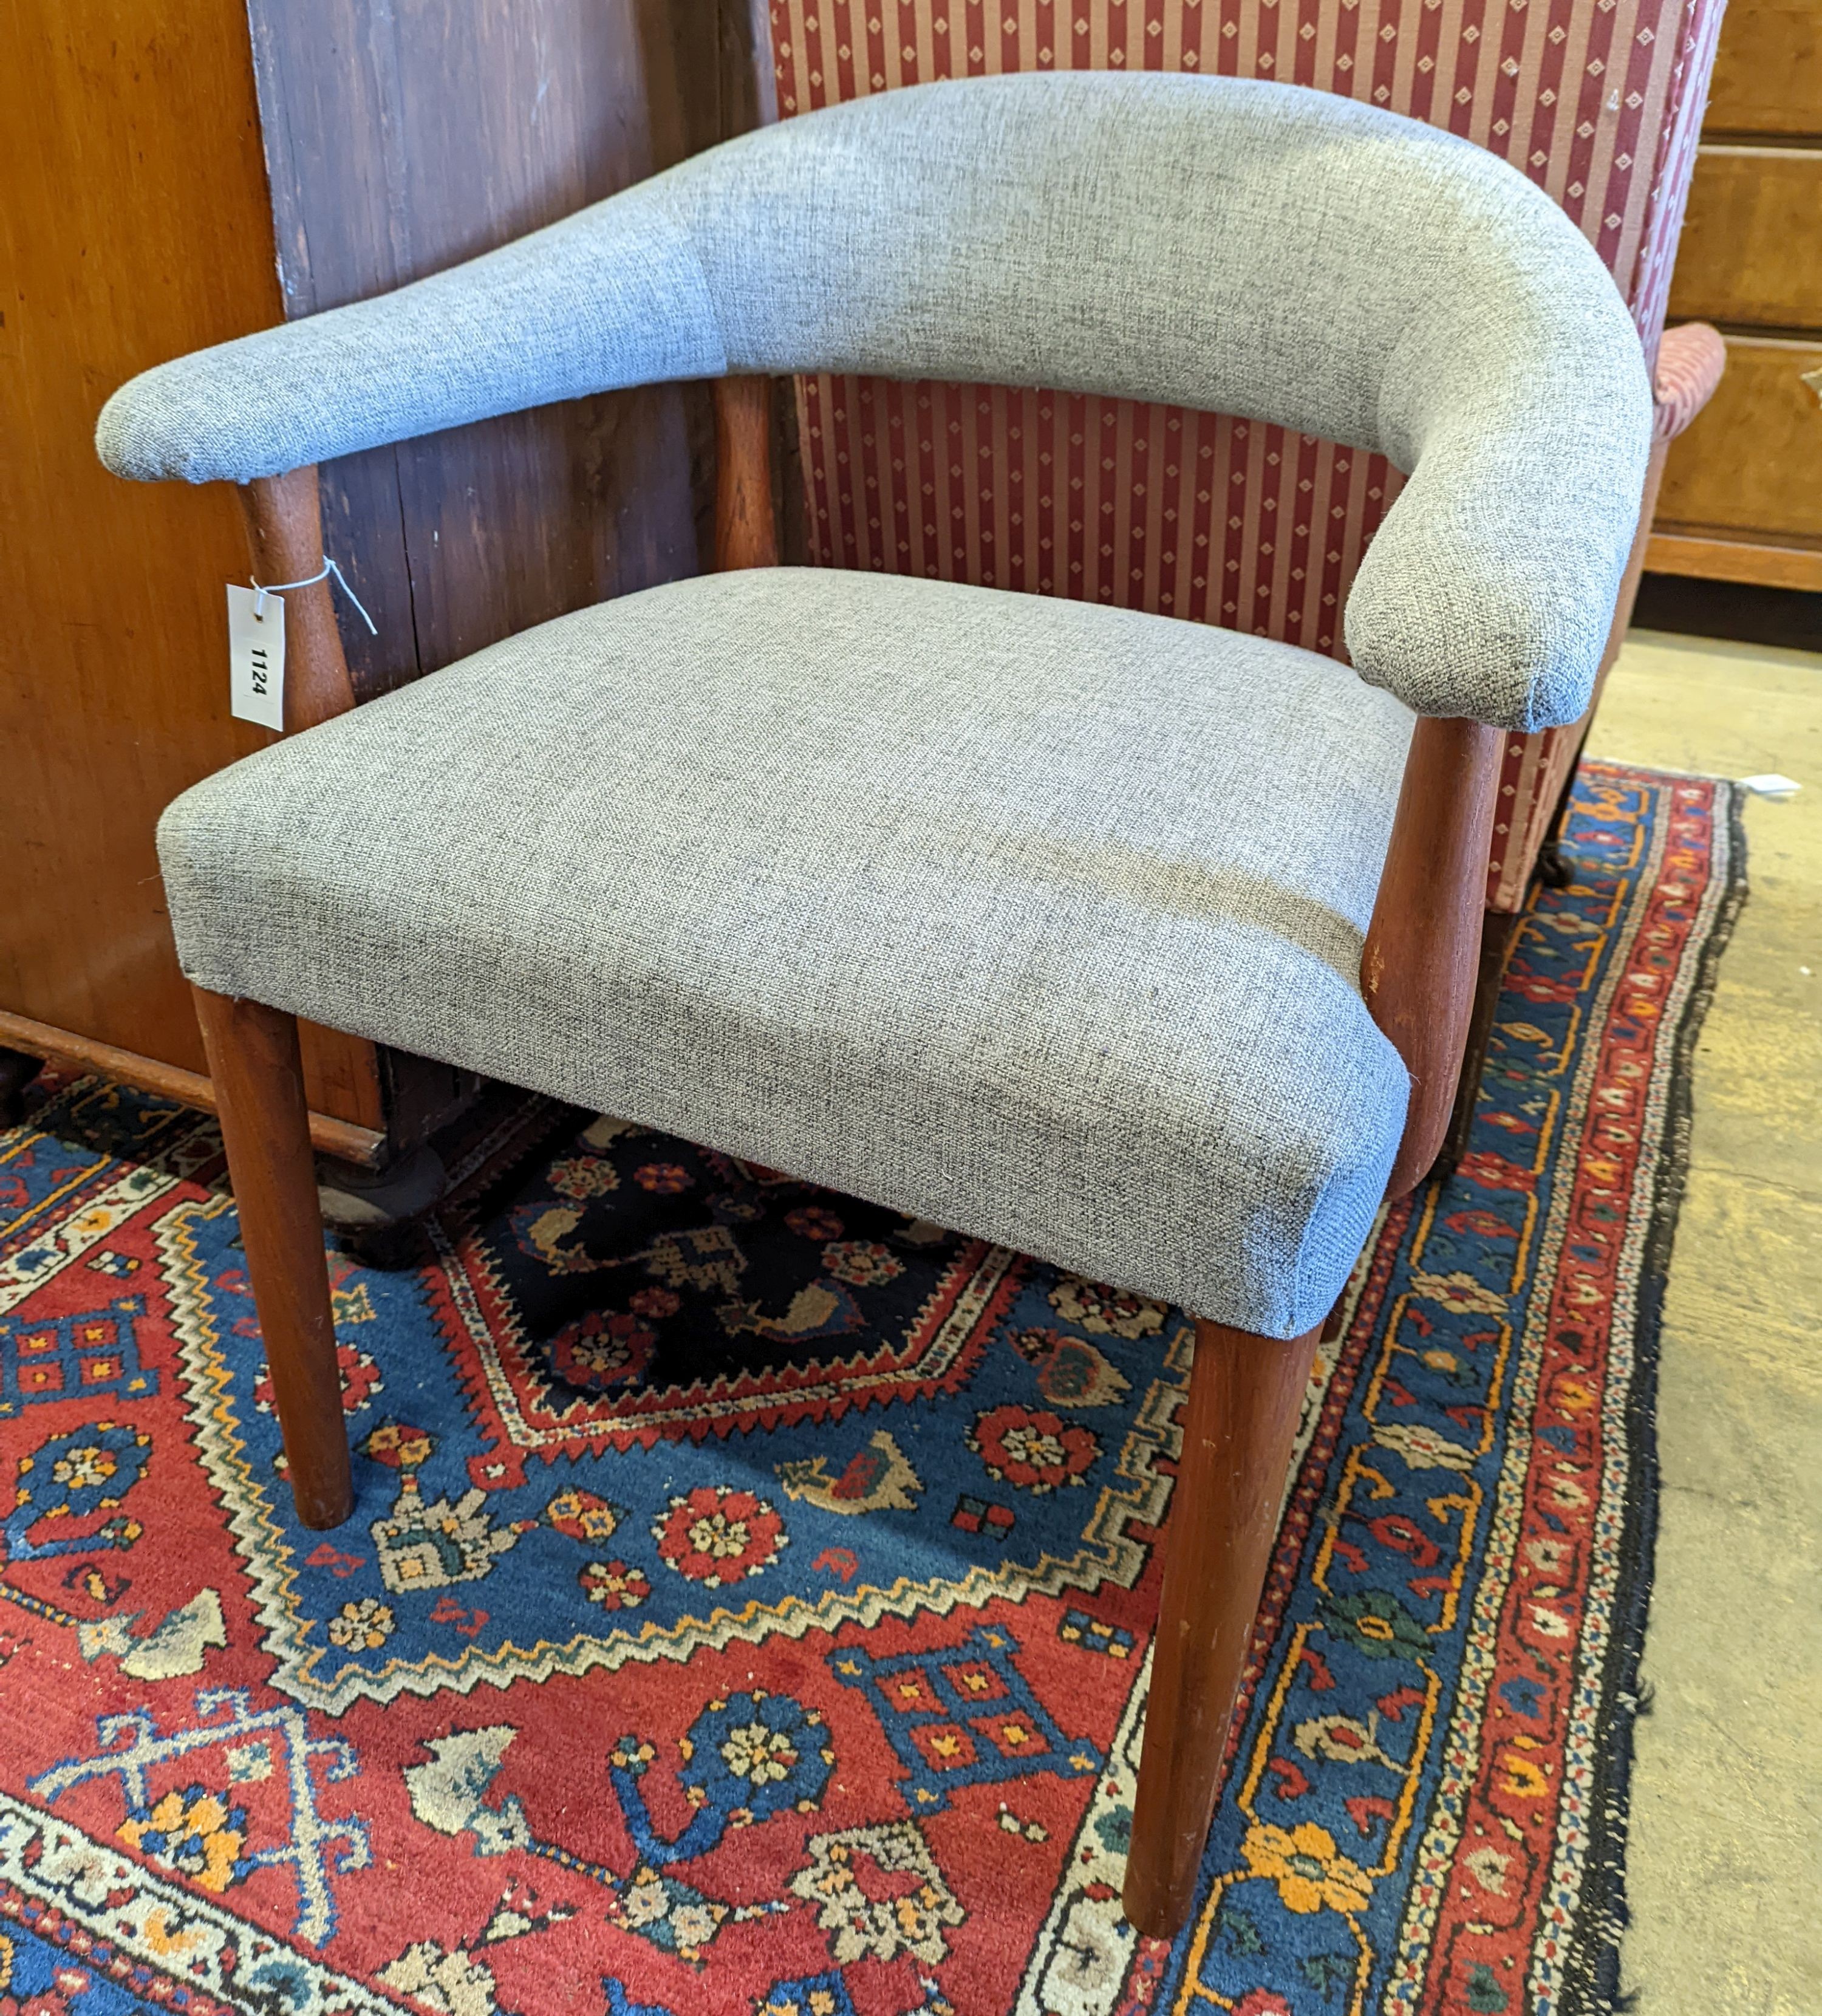 A Danish 'Ring' chair in the style of Grete Jalk